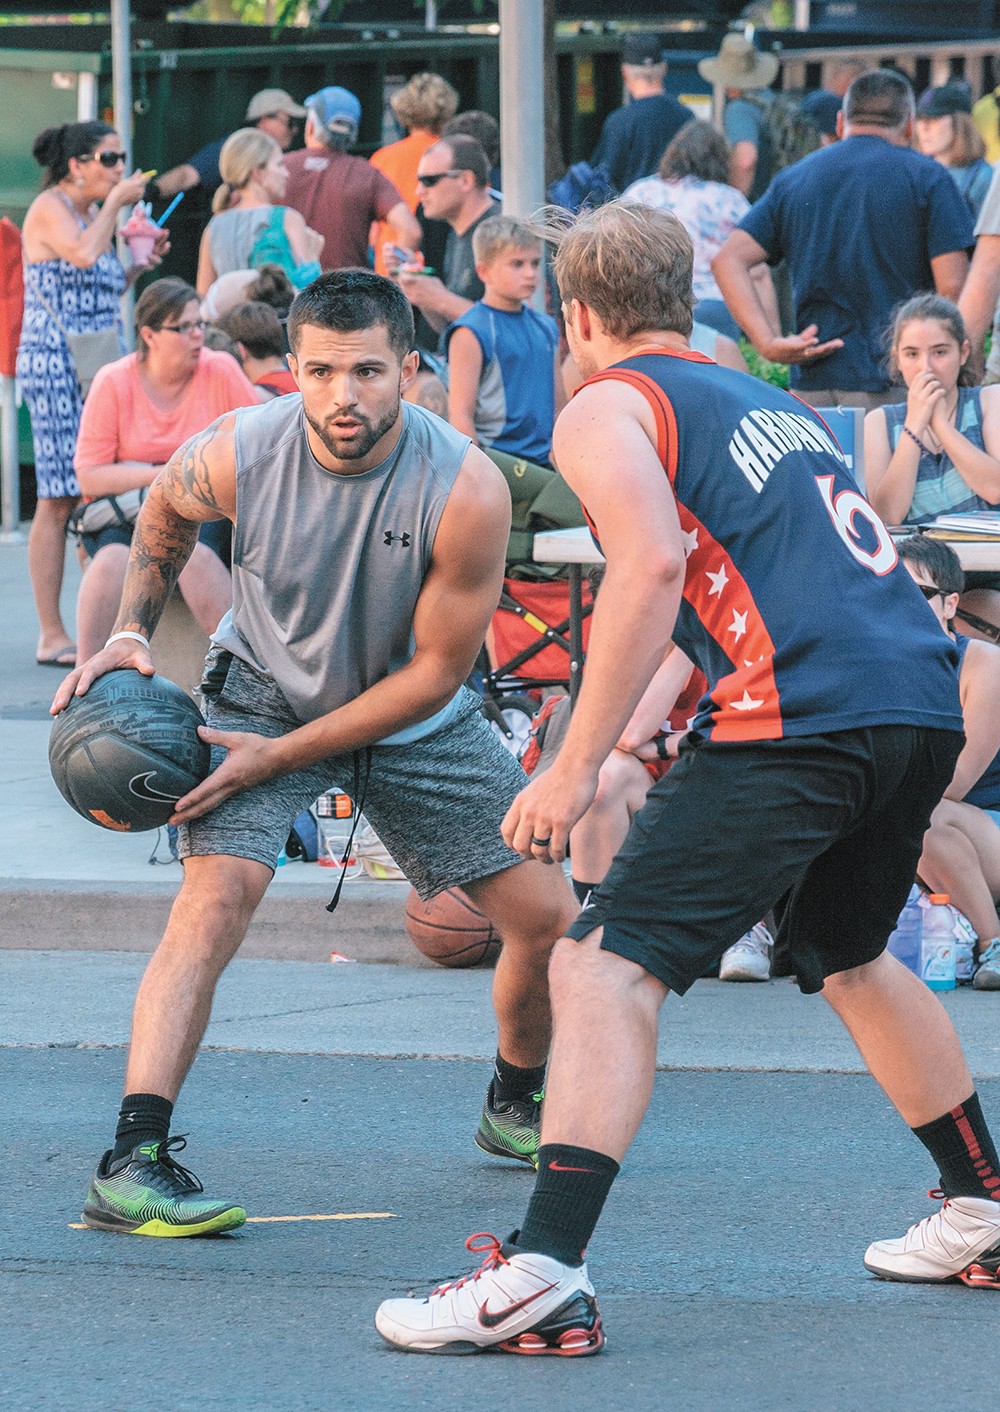 Keep a laser focus, whether on the hoop or the beer garden. - ERICK DOXEY PHOTO